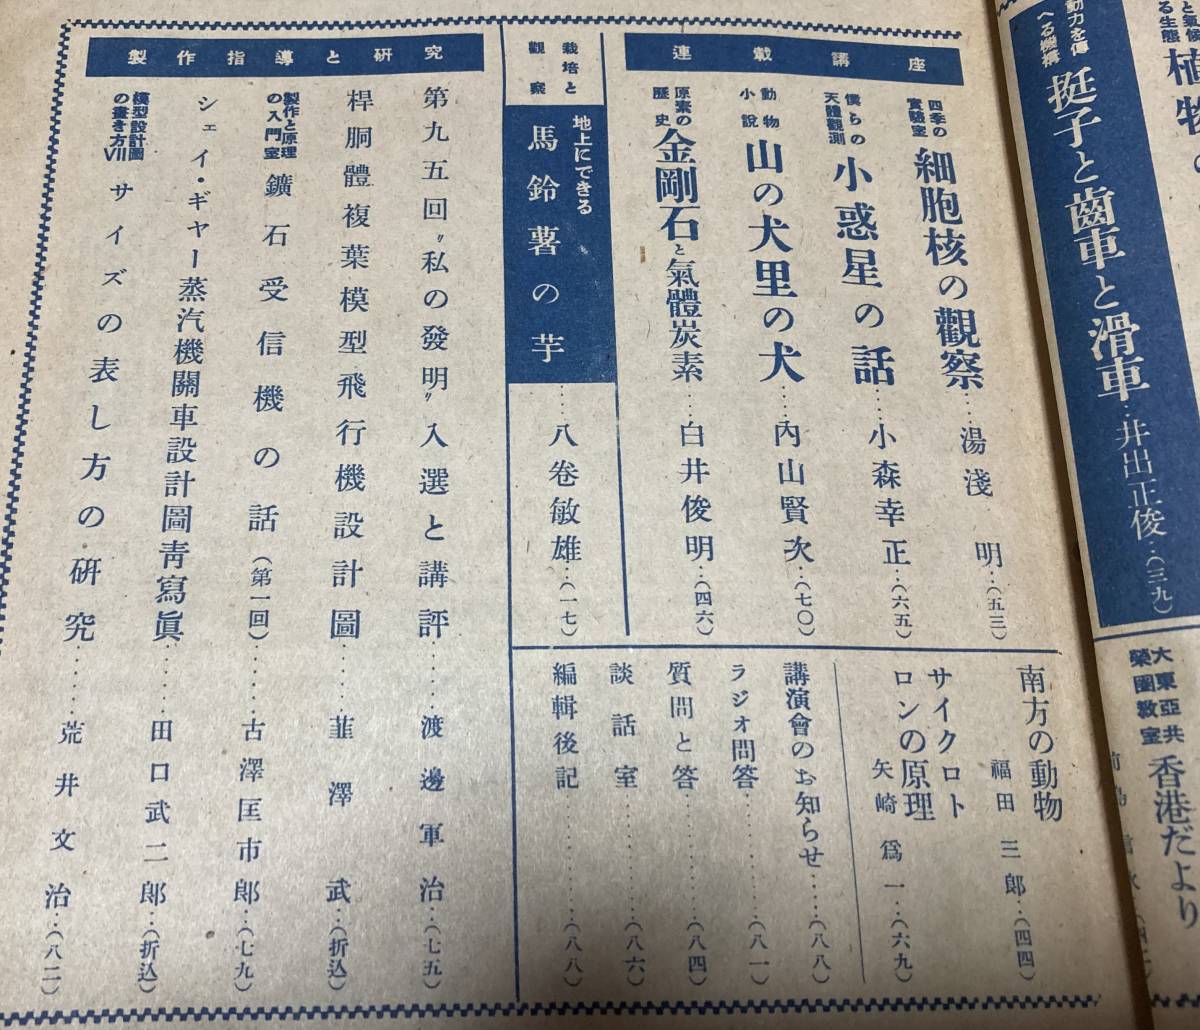  war front student. science no. 28 volume no. 4 number Showa era 17 year 4 month . writing . new light company / new ginia cruise etc. other 